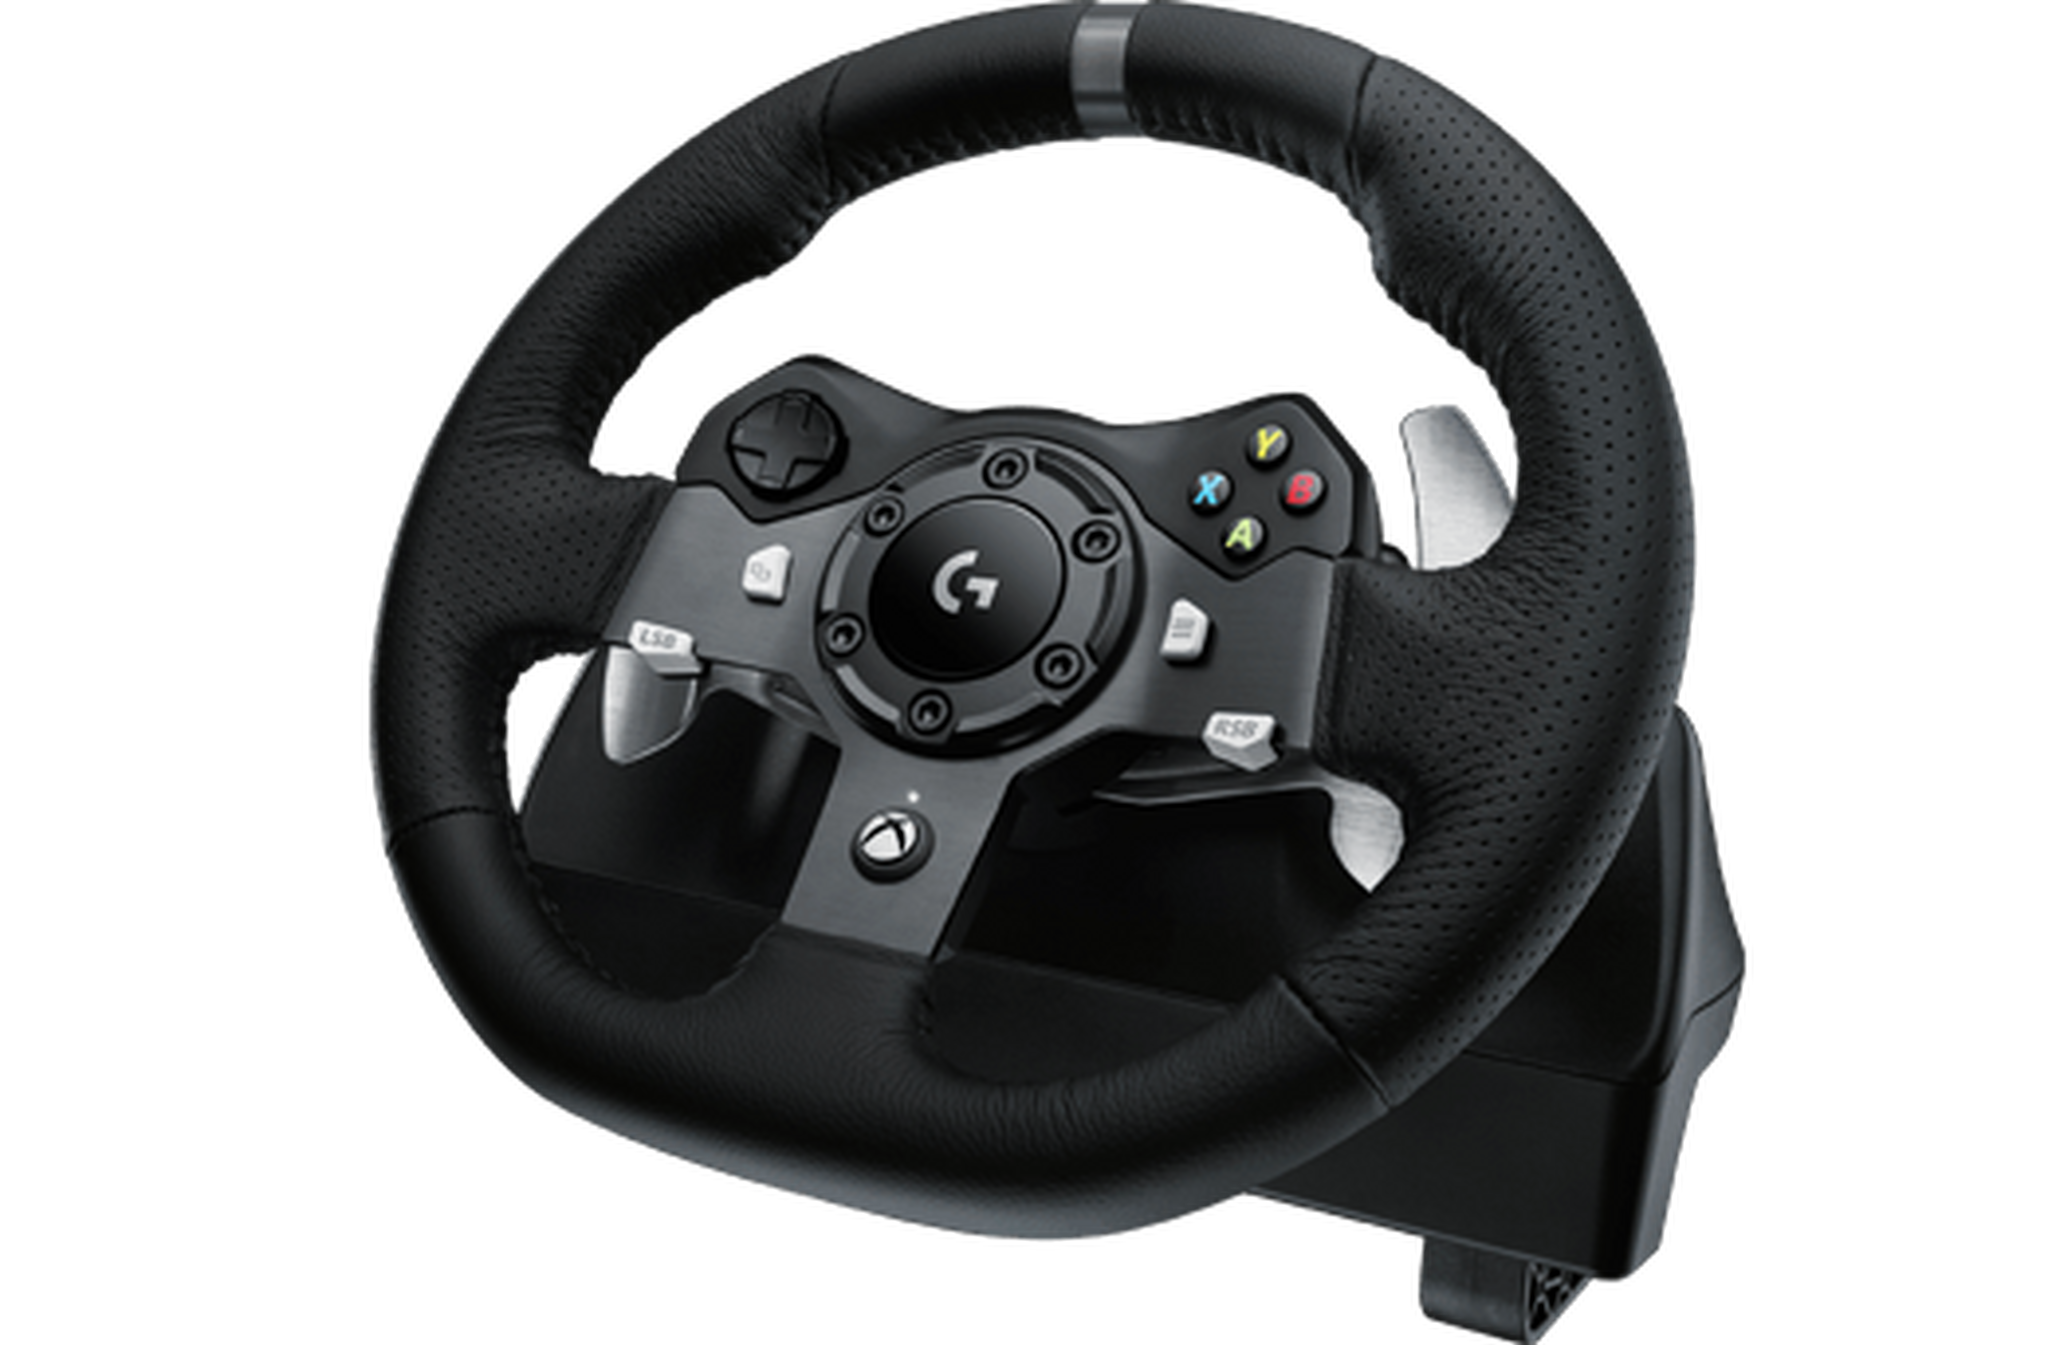 Logitech Driving Force Steering Wheel and Pedals for Xbox One and PC (941-000124) - Black